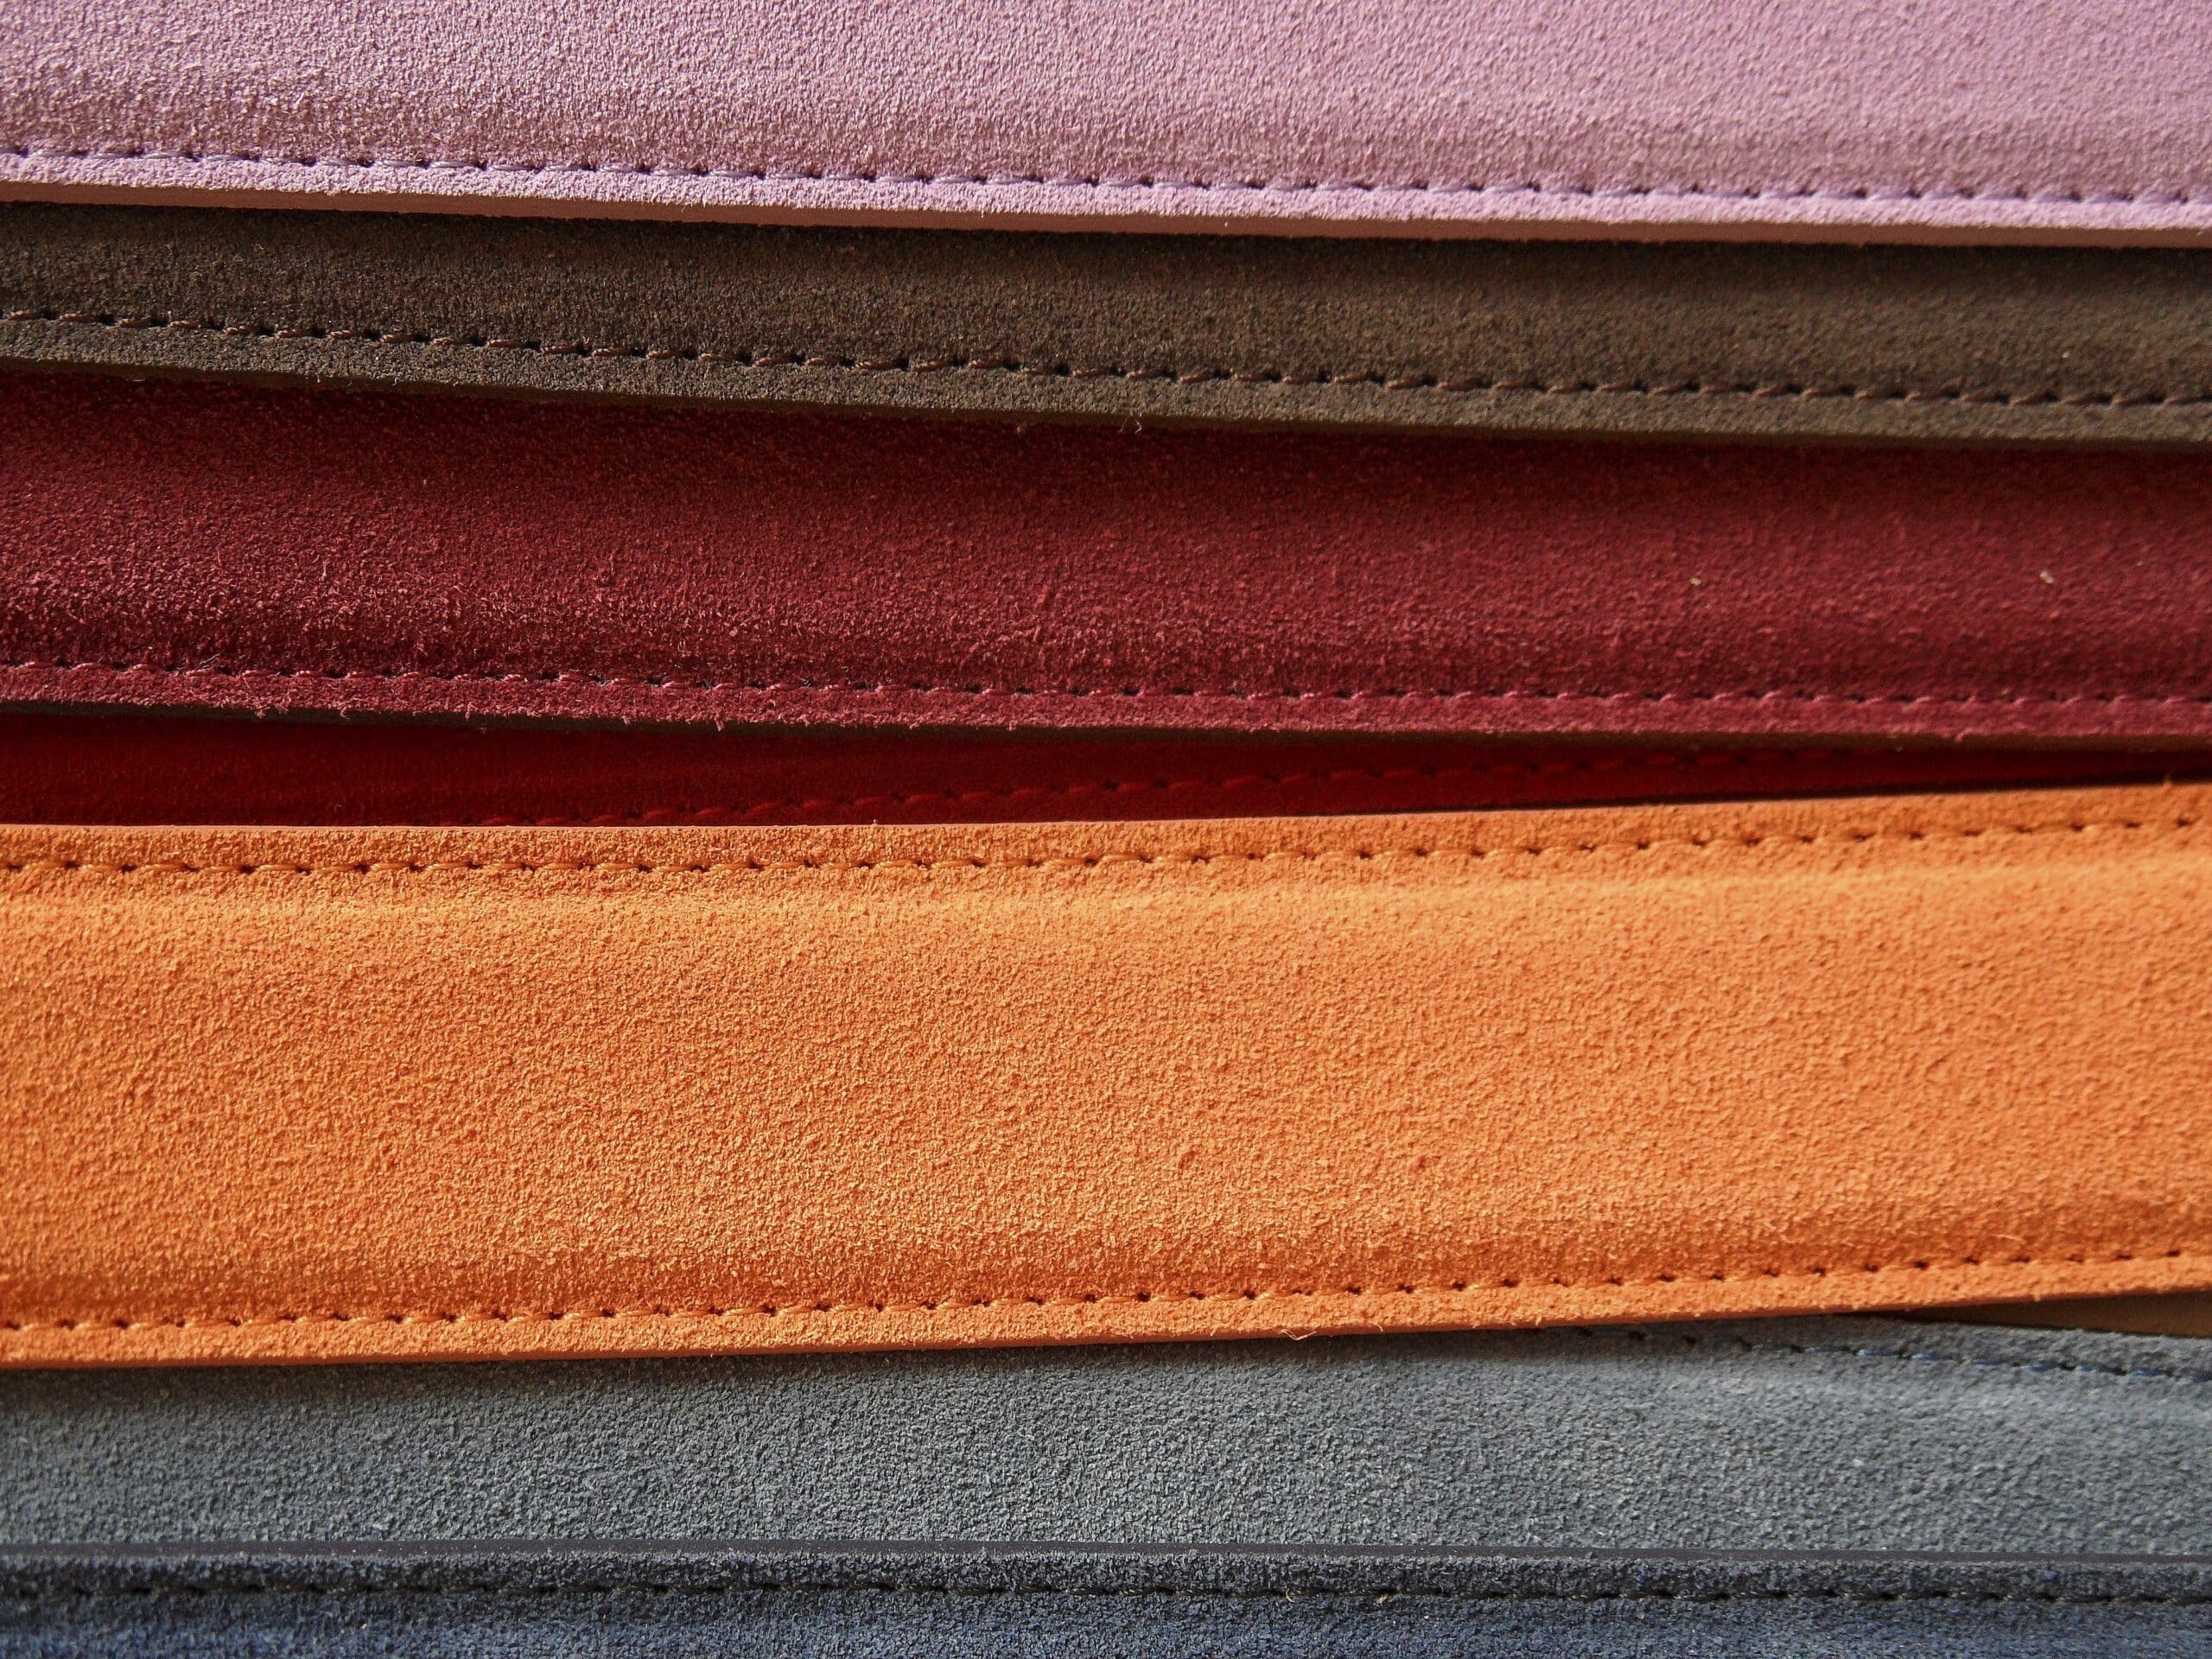 5 ethical reasons to buy exotic leather